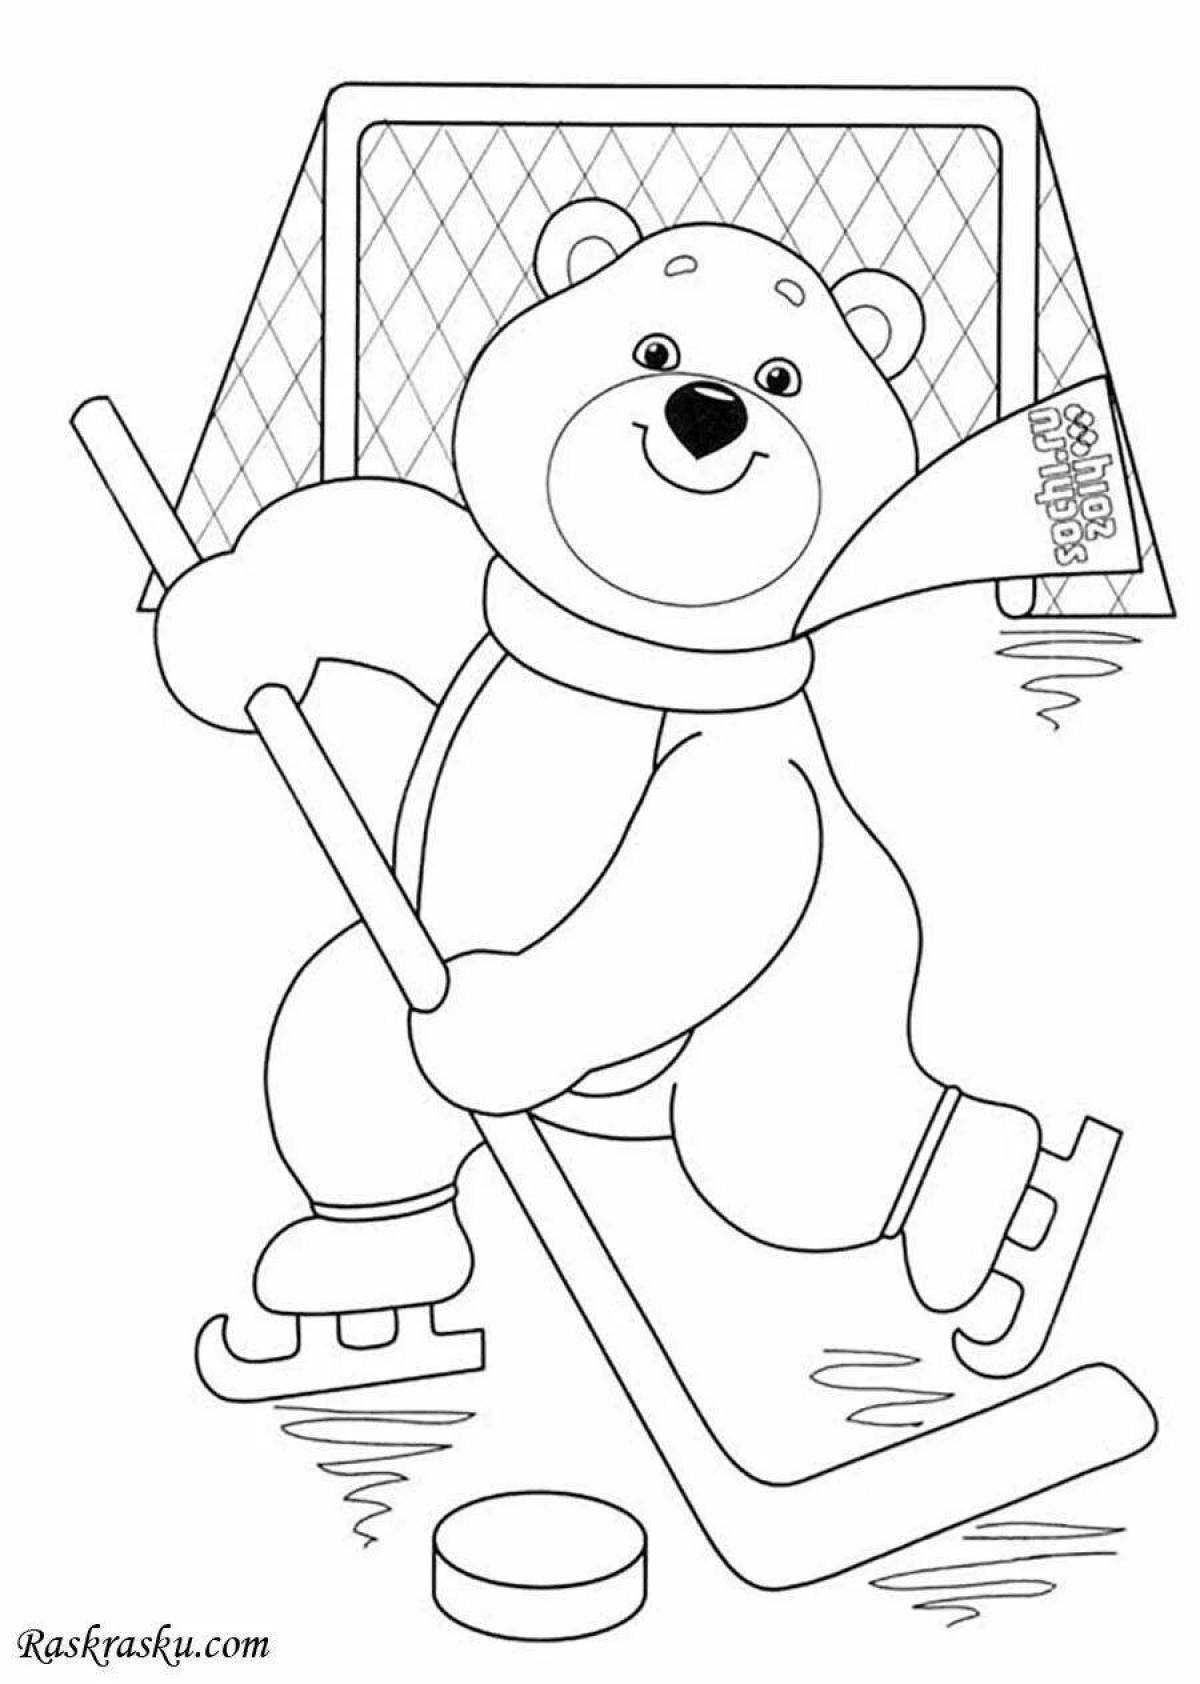 Coloring book funny bear on skis